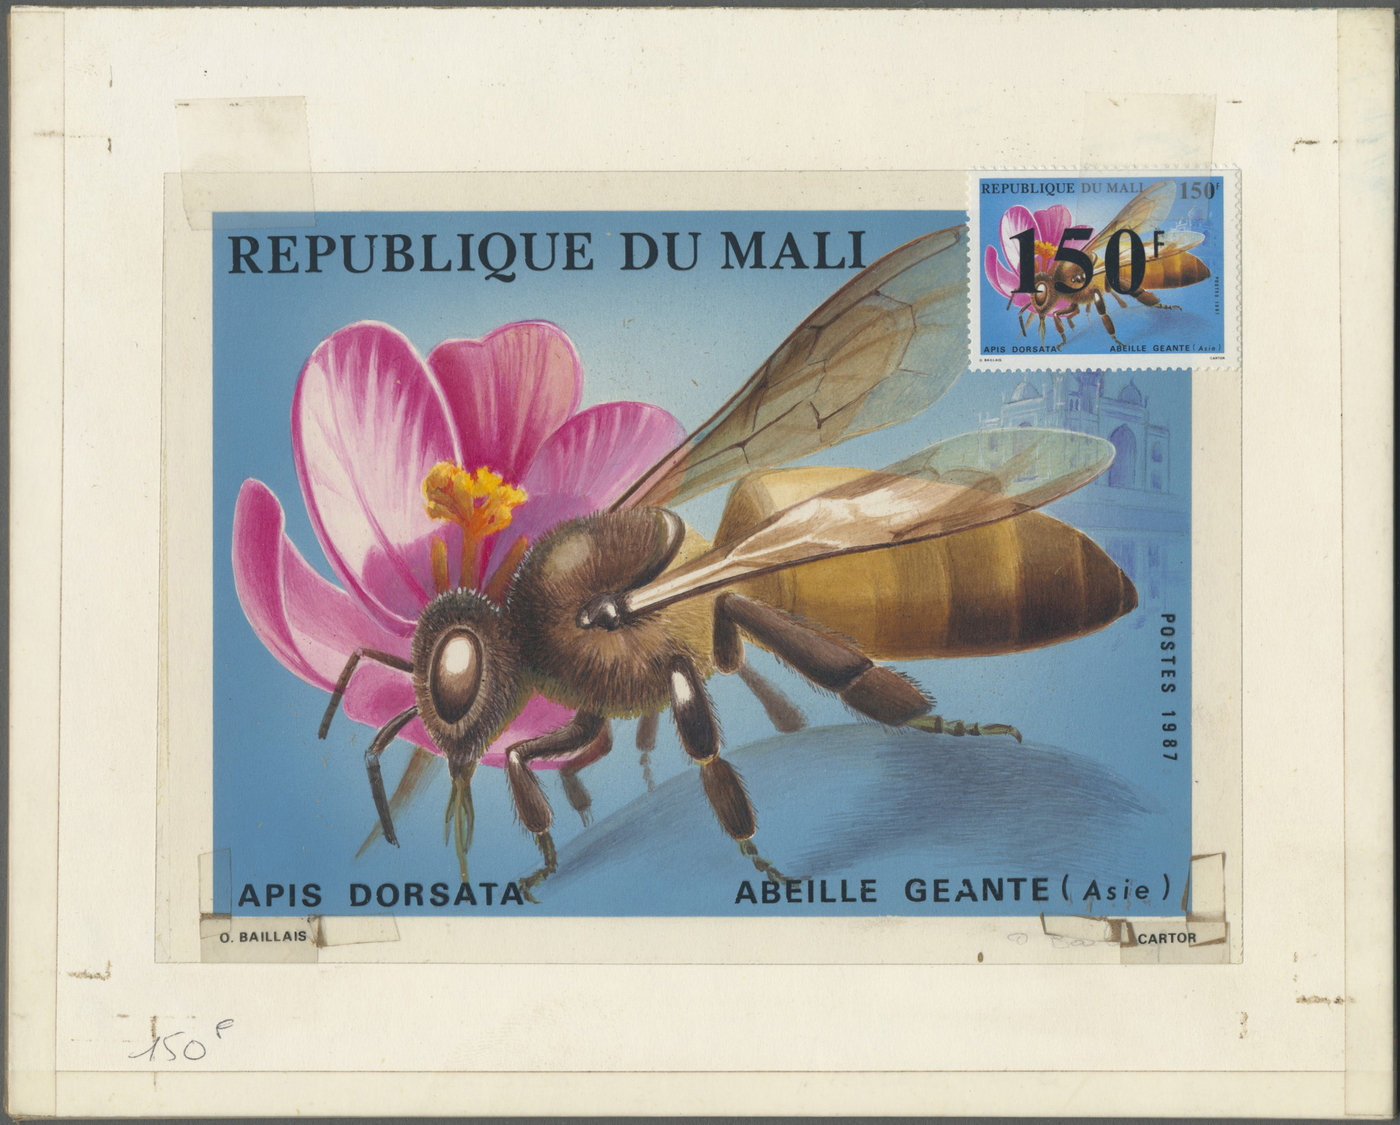 Thematik: Tiere-Bienen / Animals-bees: 1987, Mali. Artwork For The 150fr Value Of The "Bees" Series Showing "Apis Dorsat - Abeilles